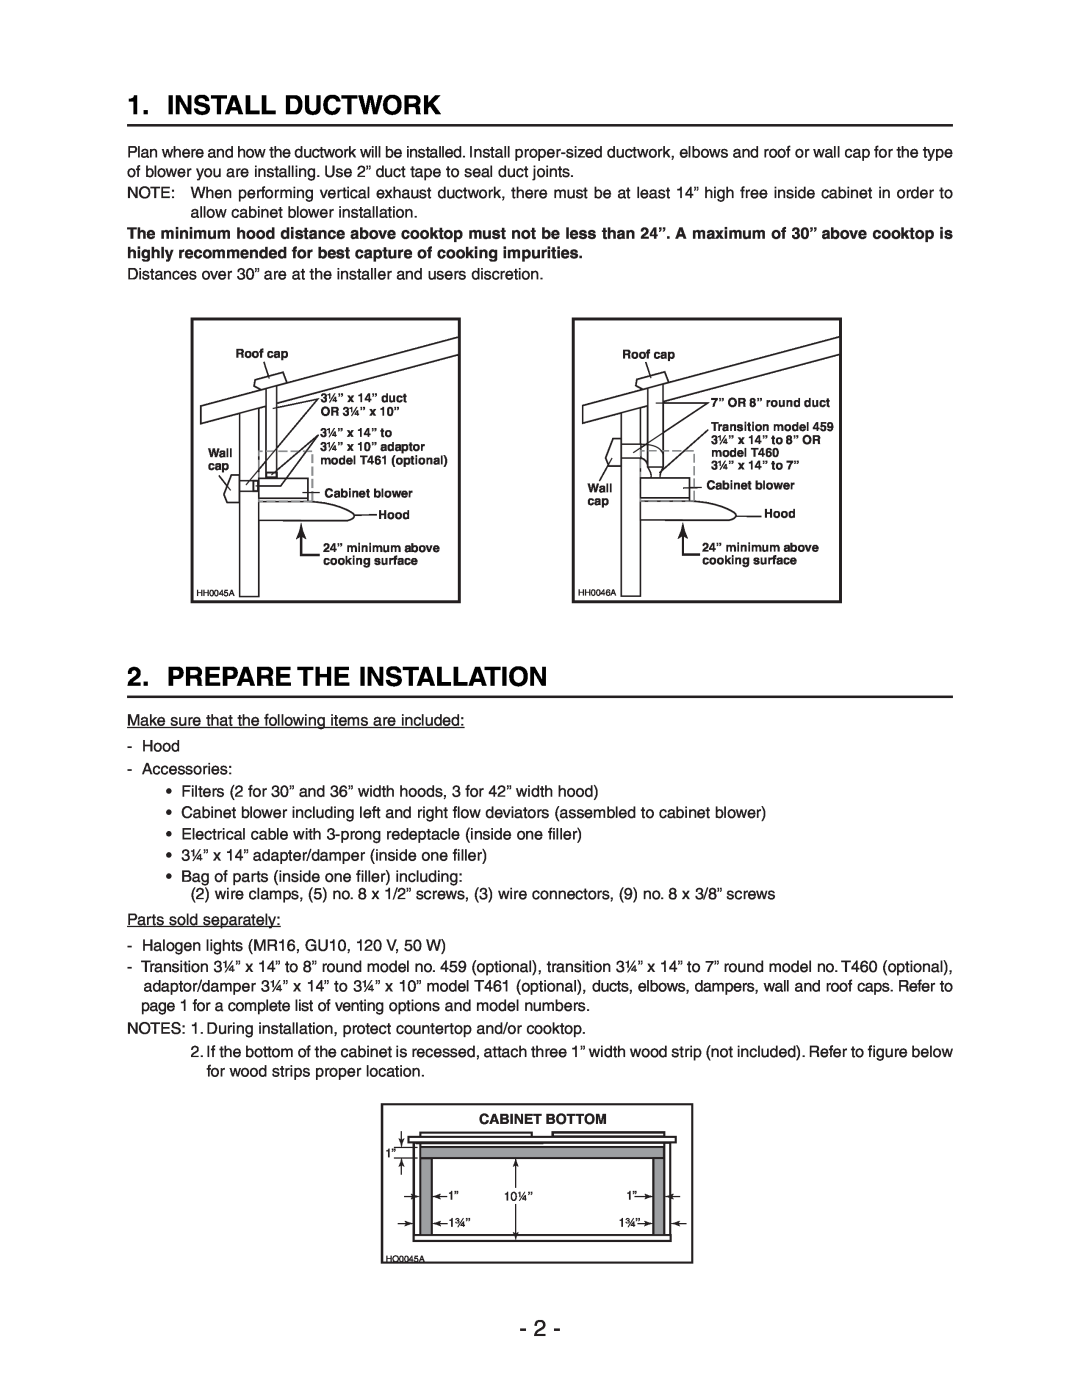 Broan Model E662 installation instructions Install Ductwork, Prepare The Installation 